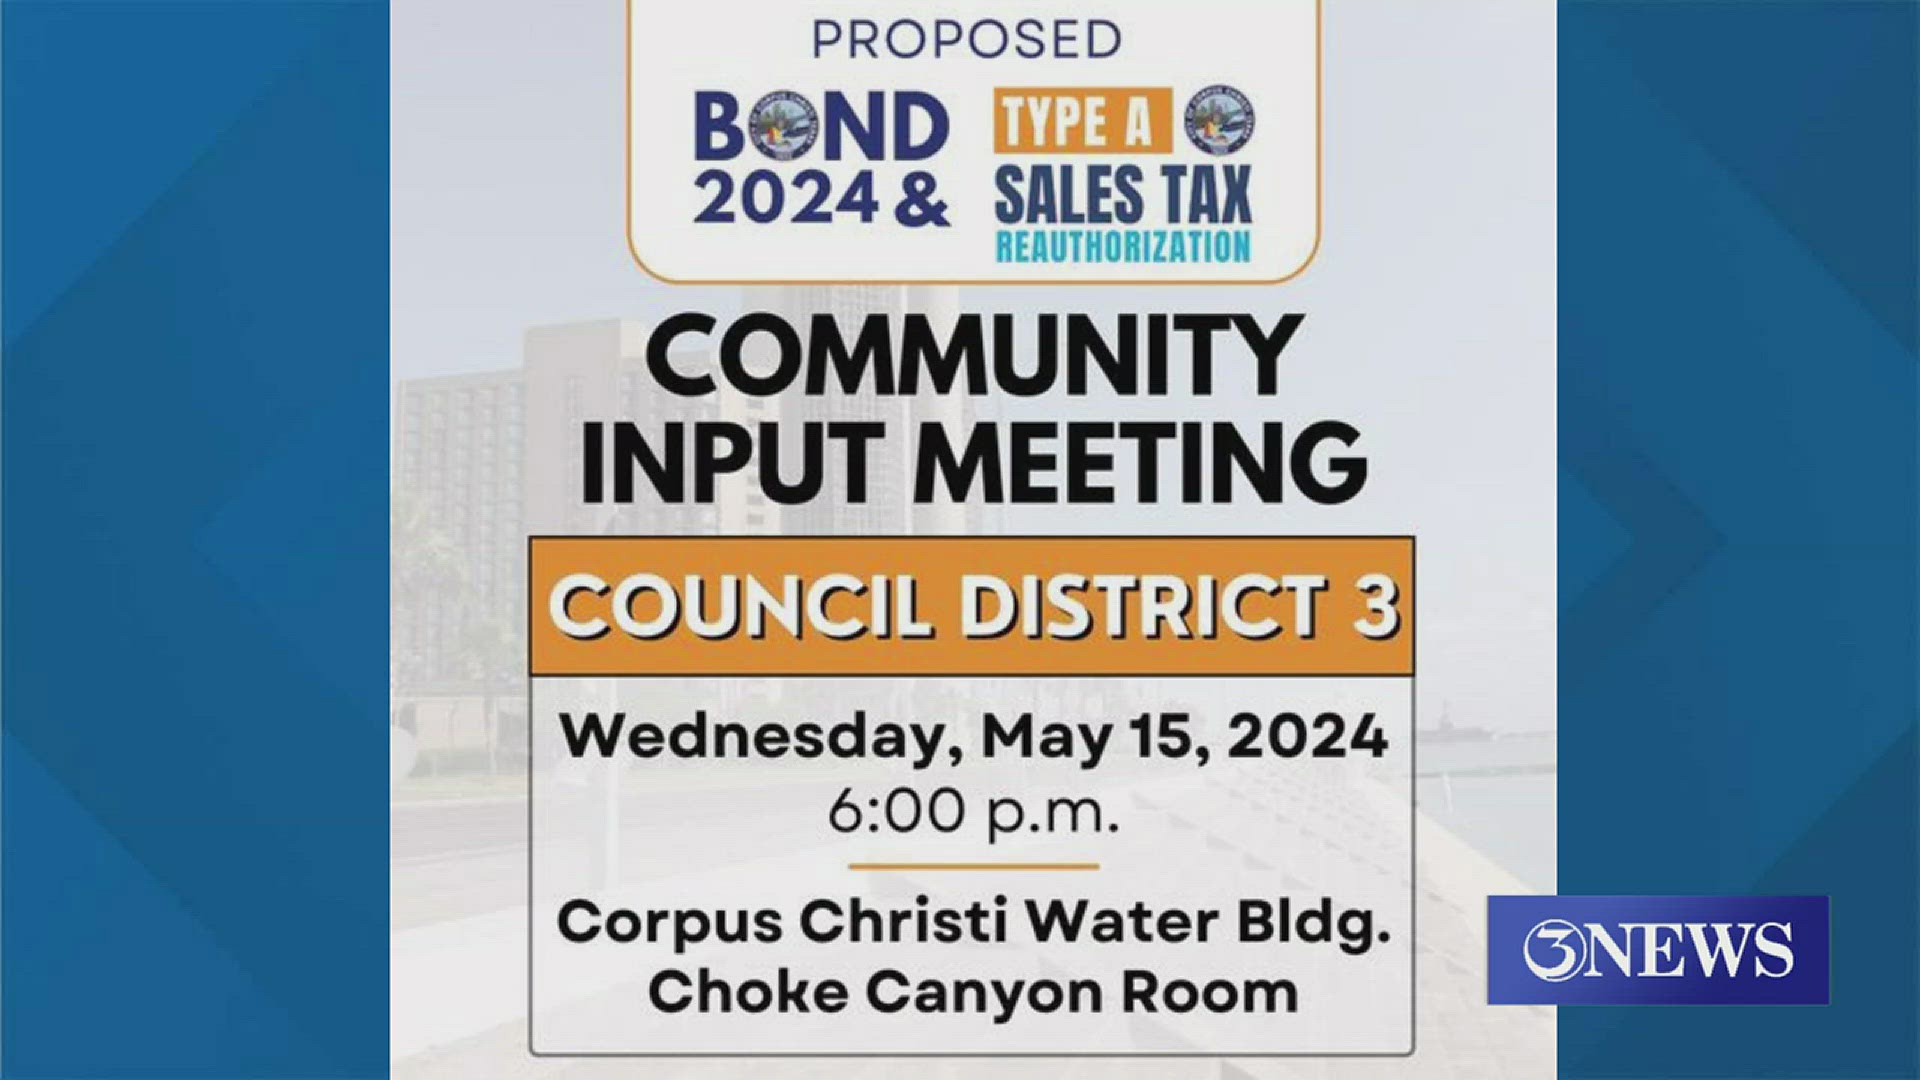 The meeting will discuss the proposed Bond 2024 plan and the Type A sales tax re-authorization.